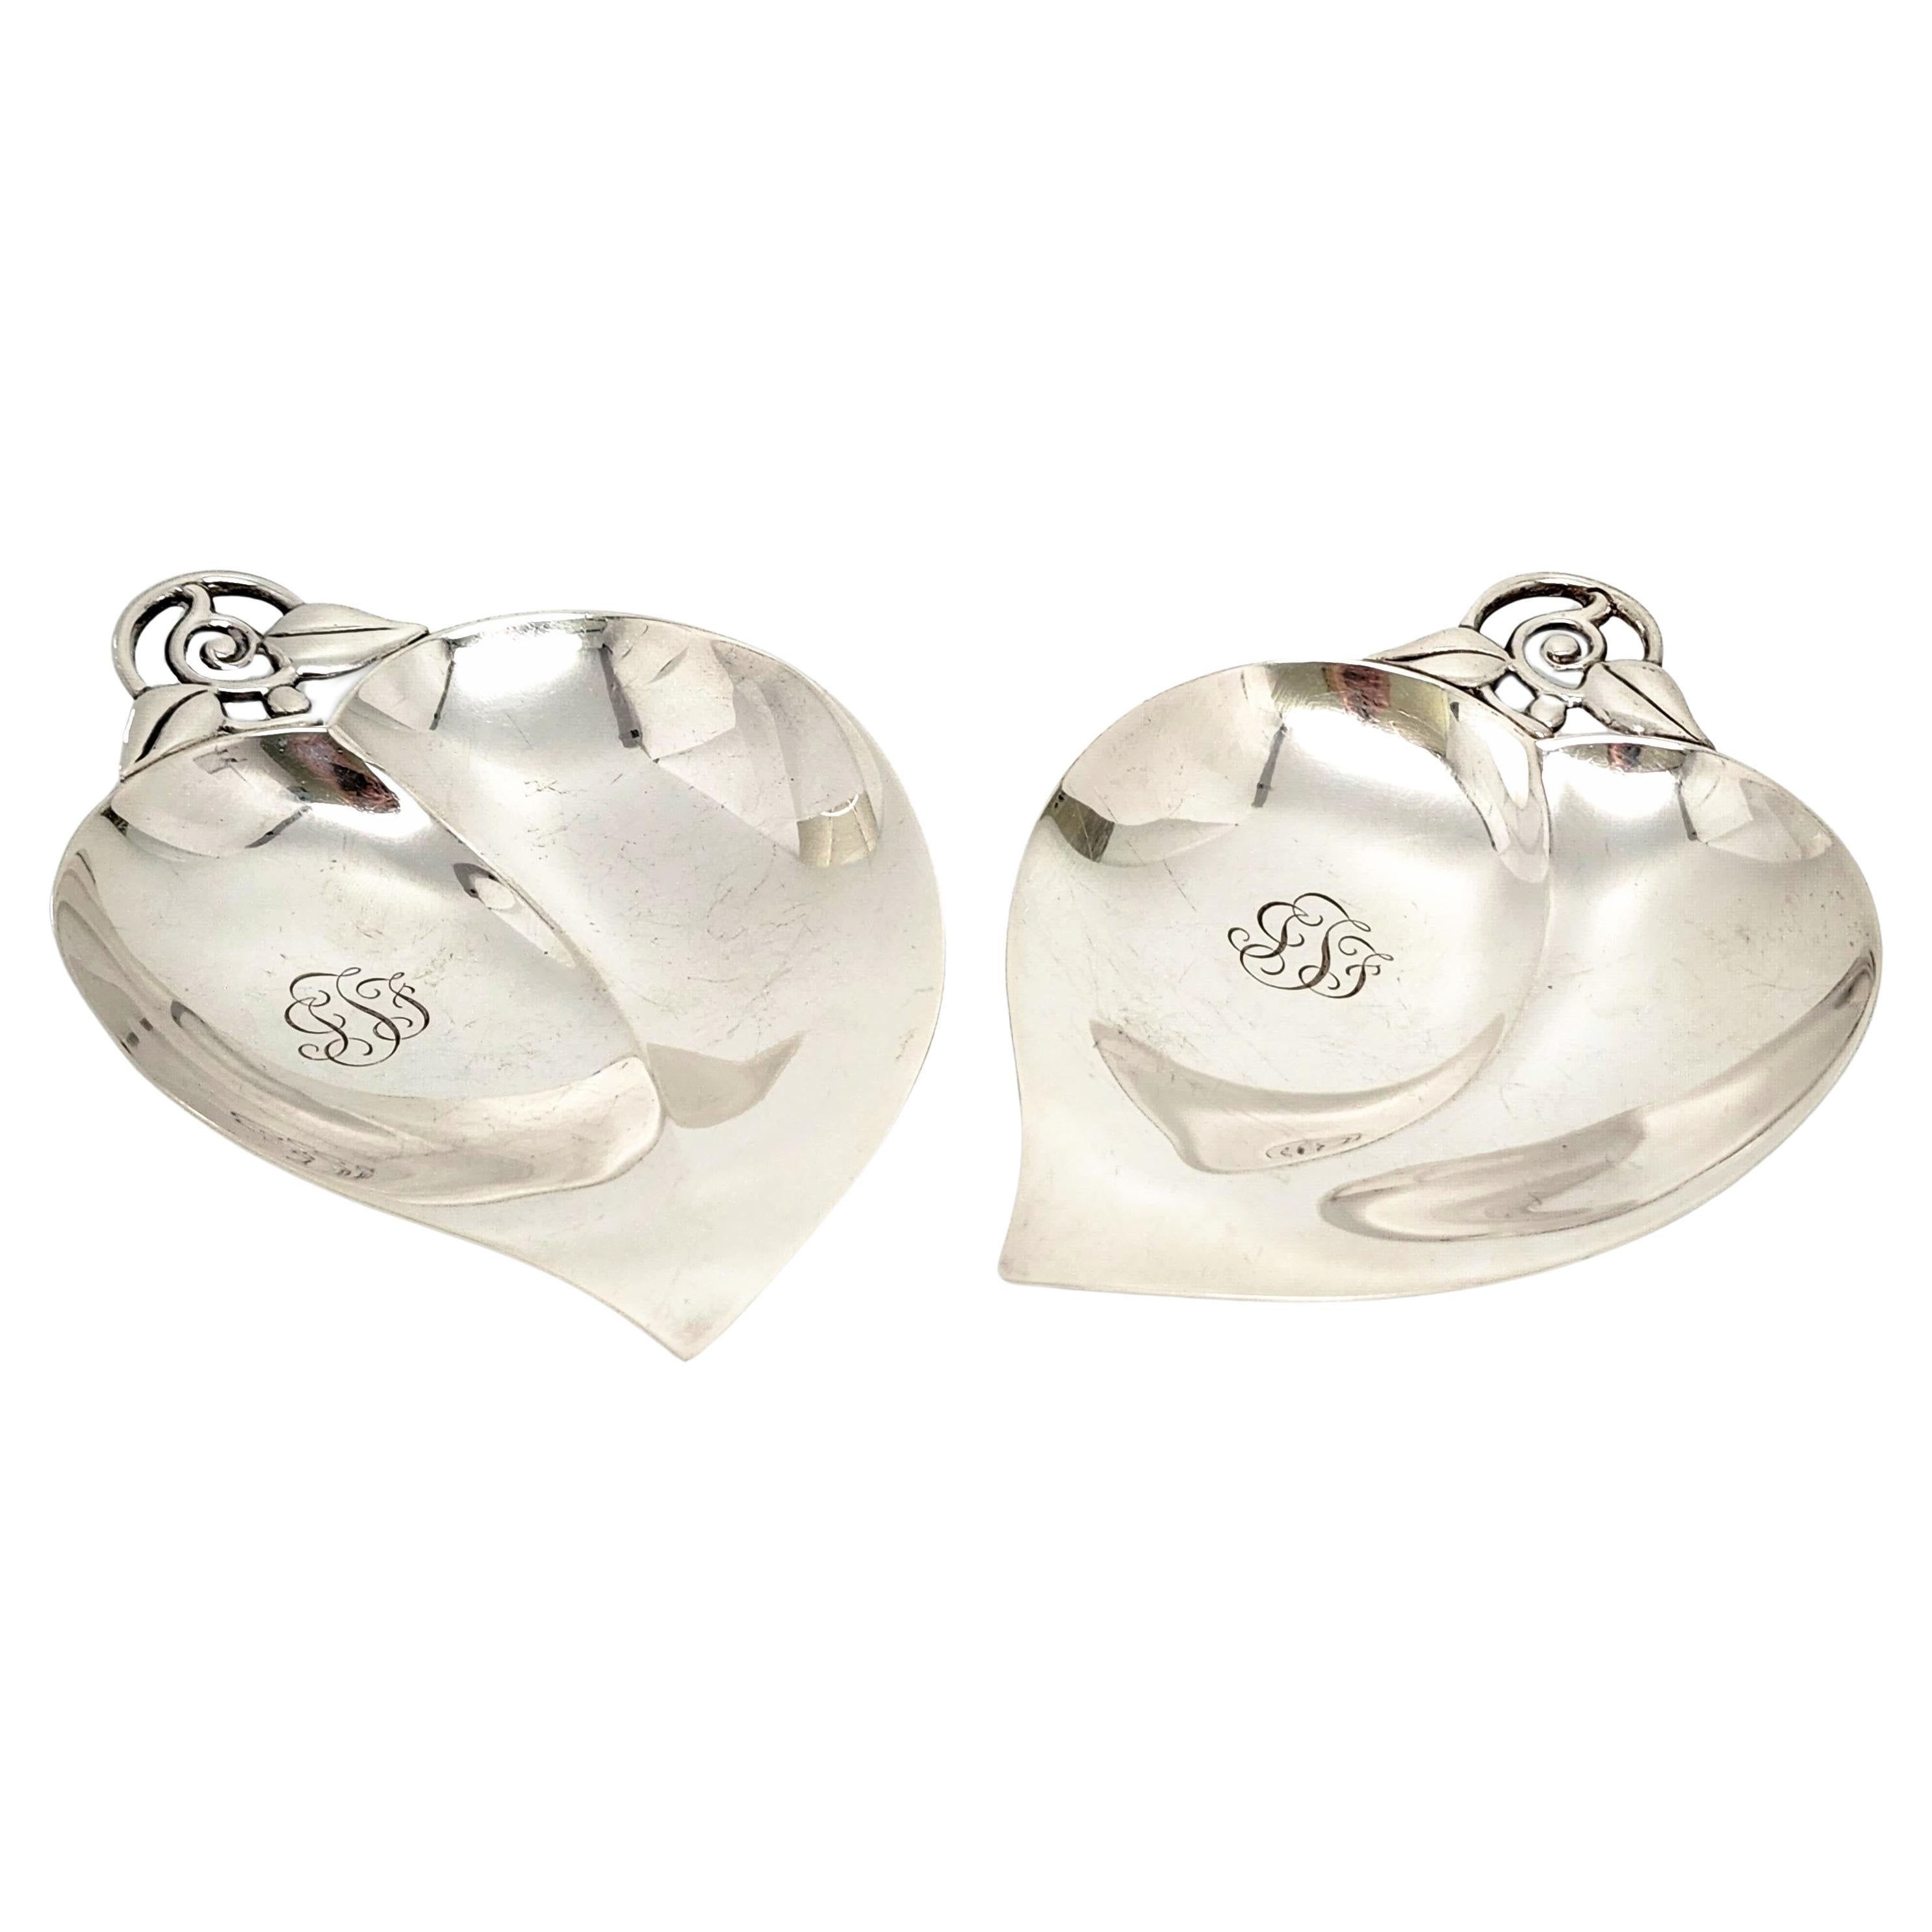 Set of 2 Tiffany & Co Sterling Silver Heart/Apple Bowls with Monogram For Sale